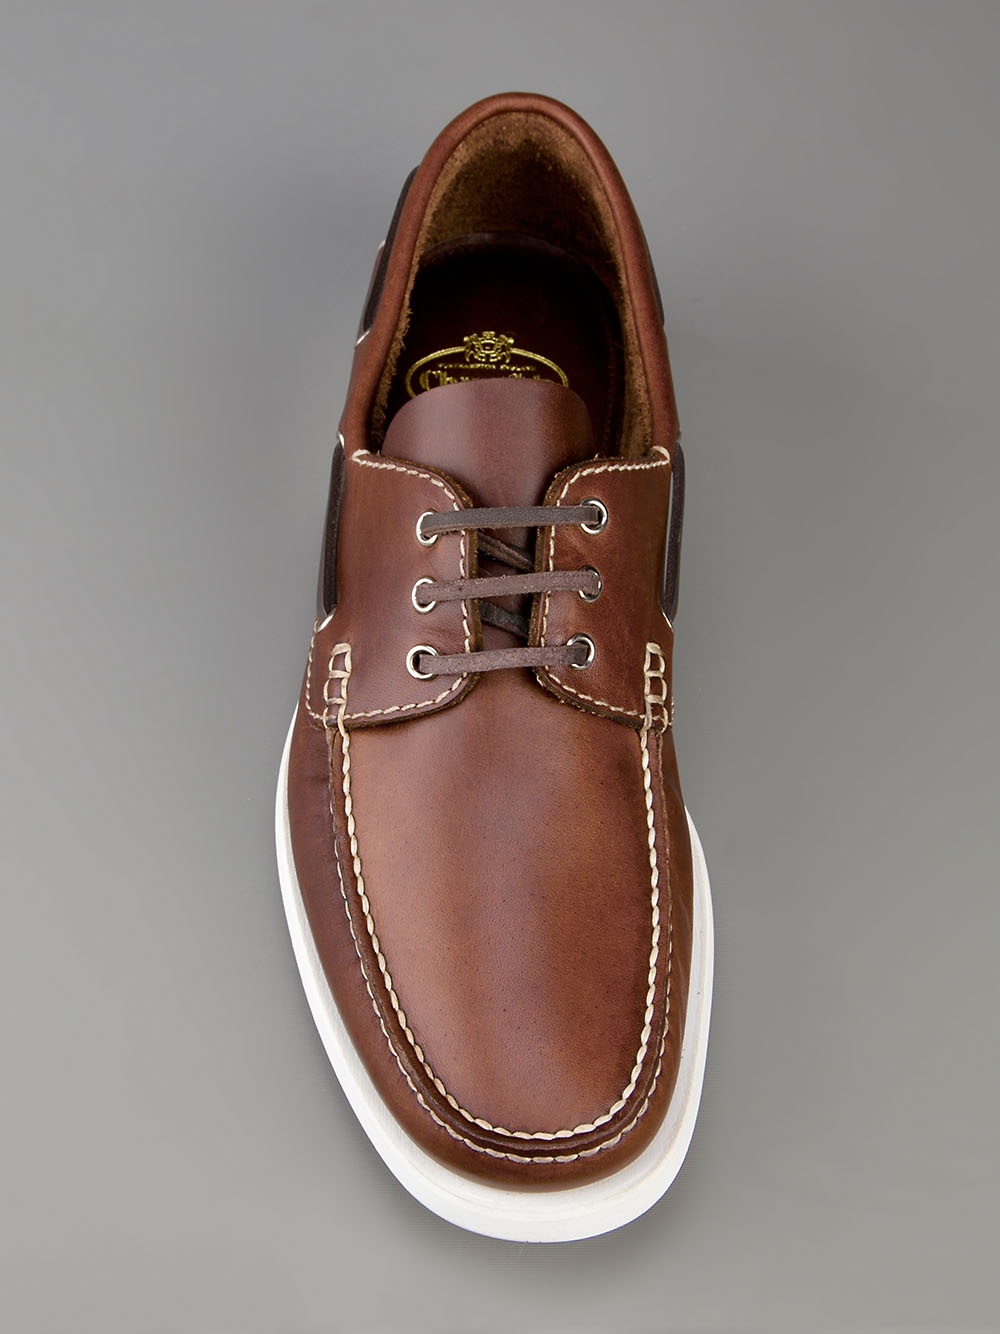 Church's Boat Shoes in Brown for Men - Lyst